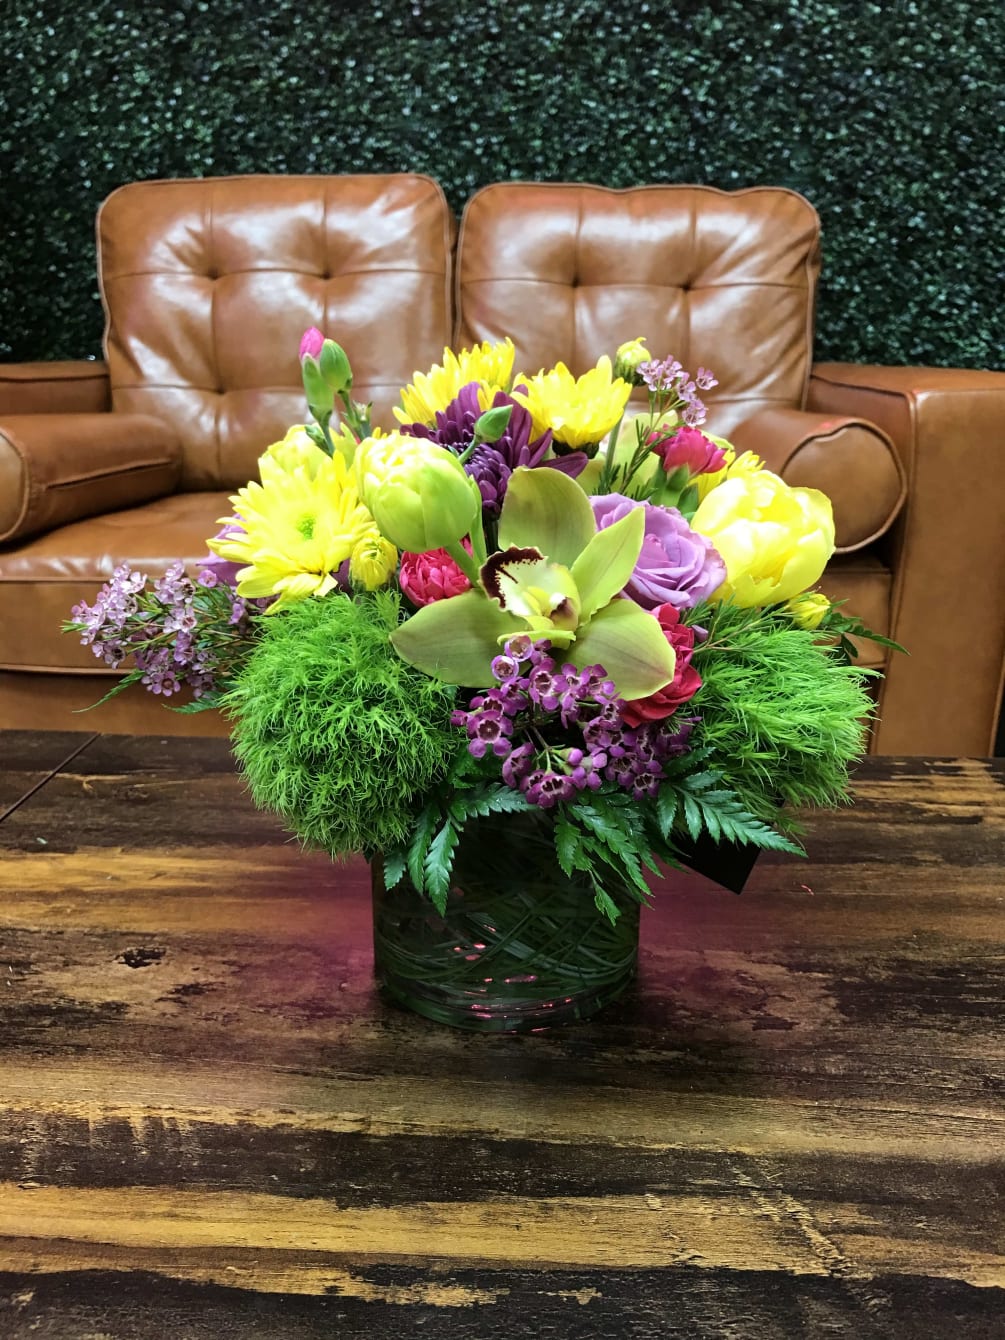 Orchids,roses, and a unique blend of seasonal flowers. Varieties and colors may